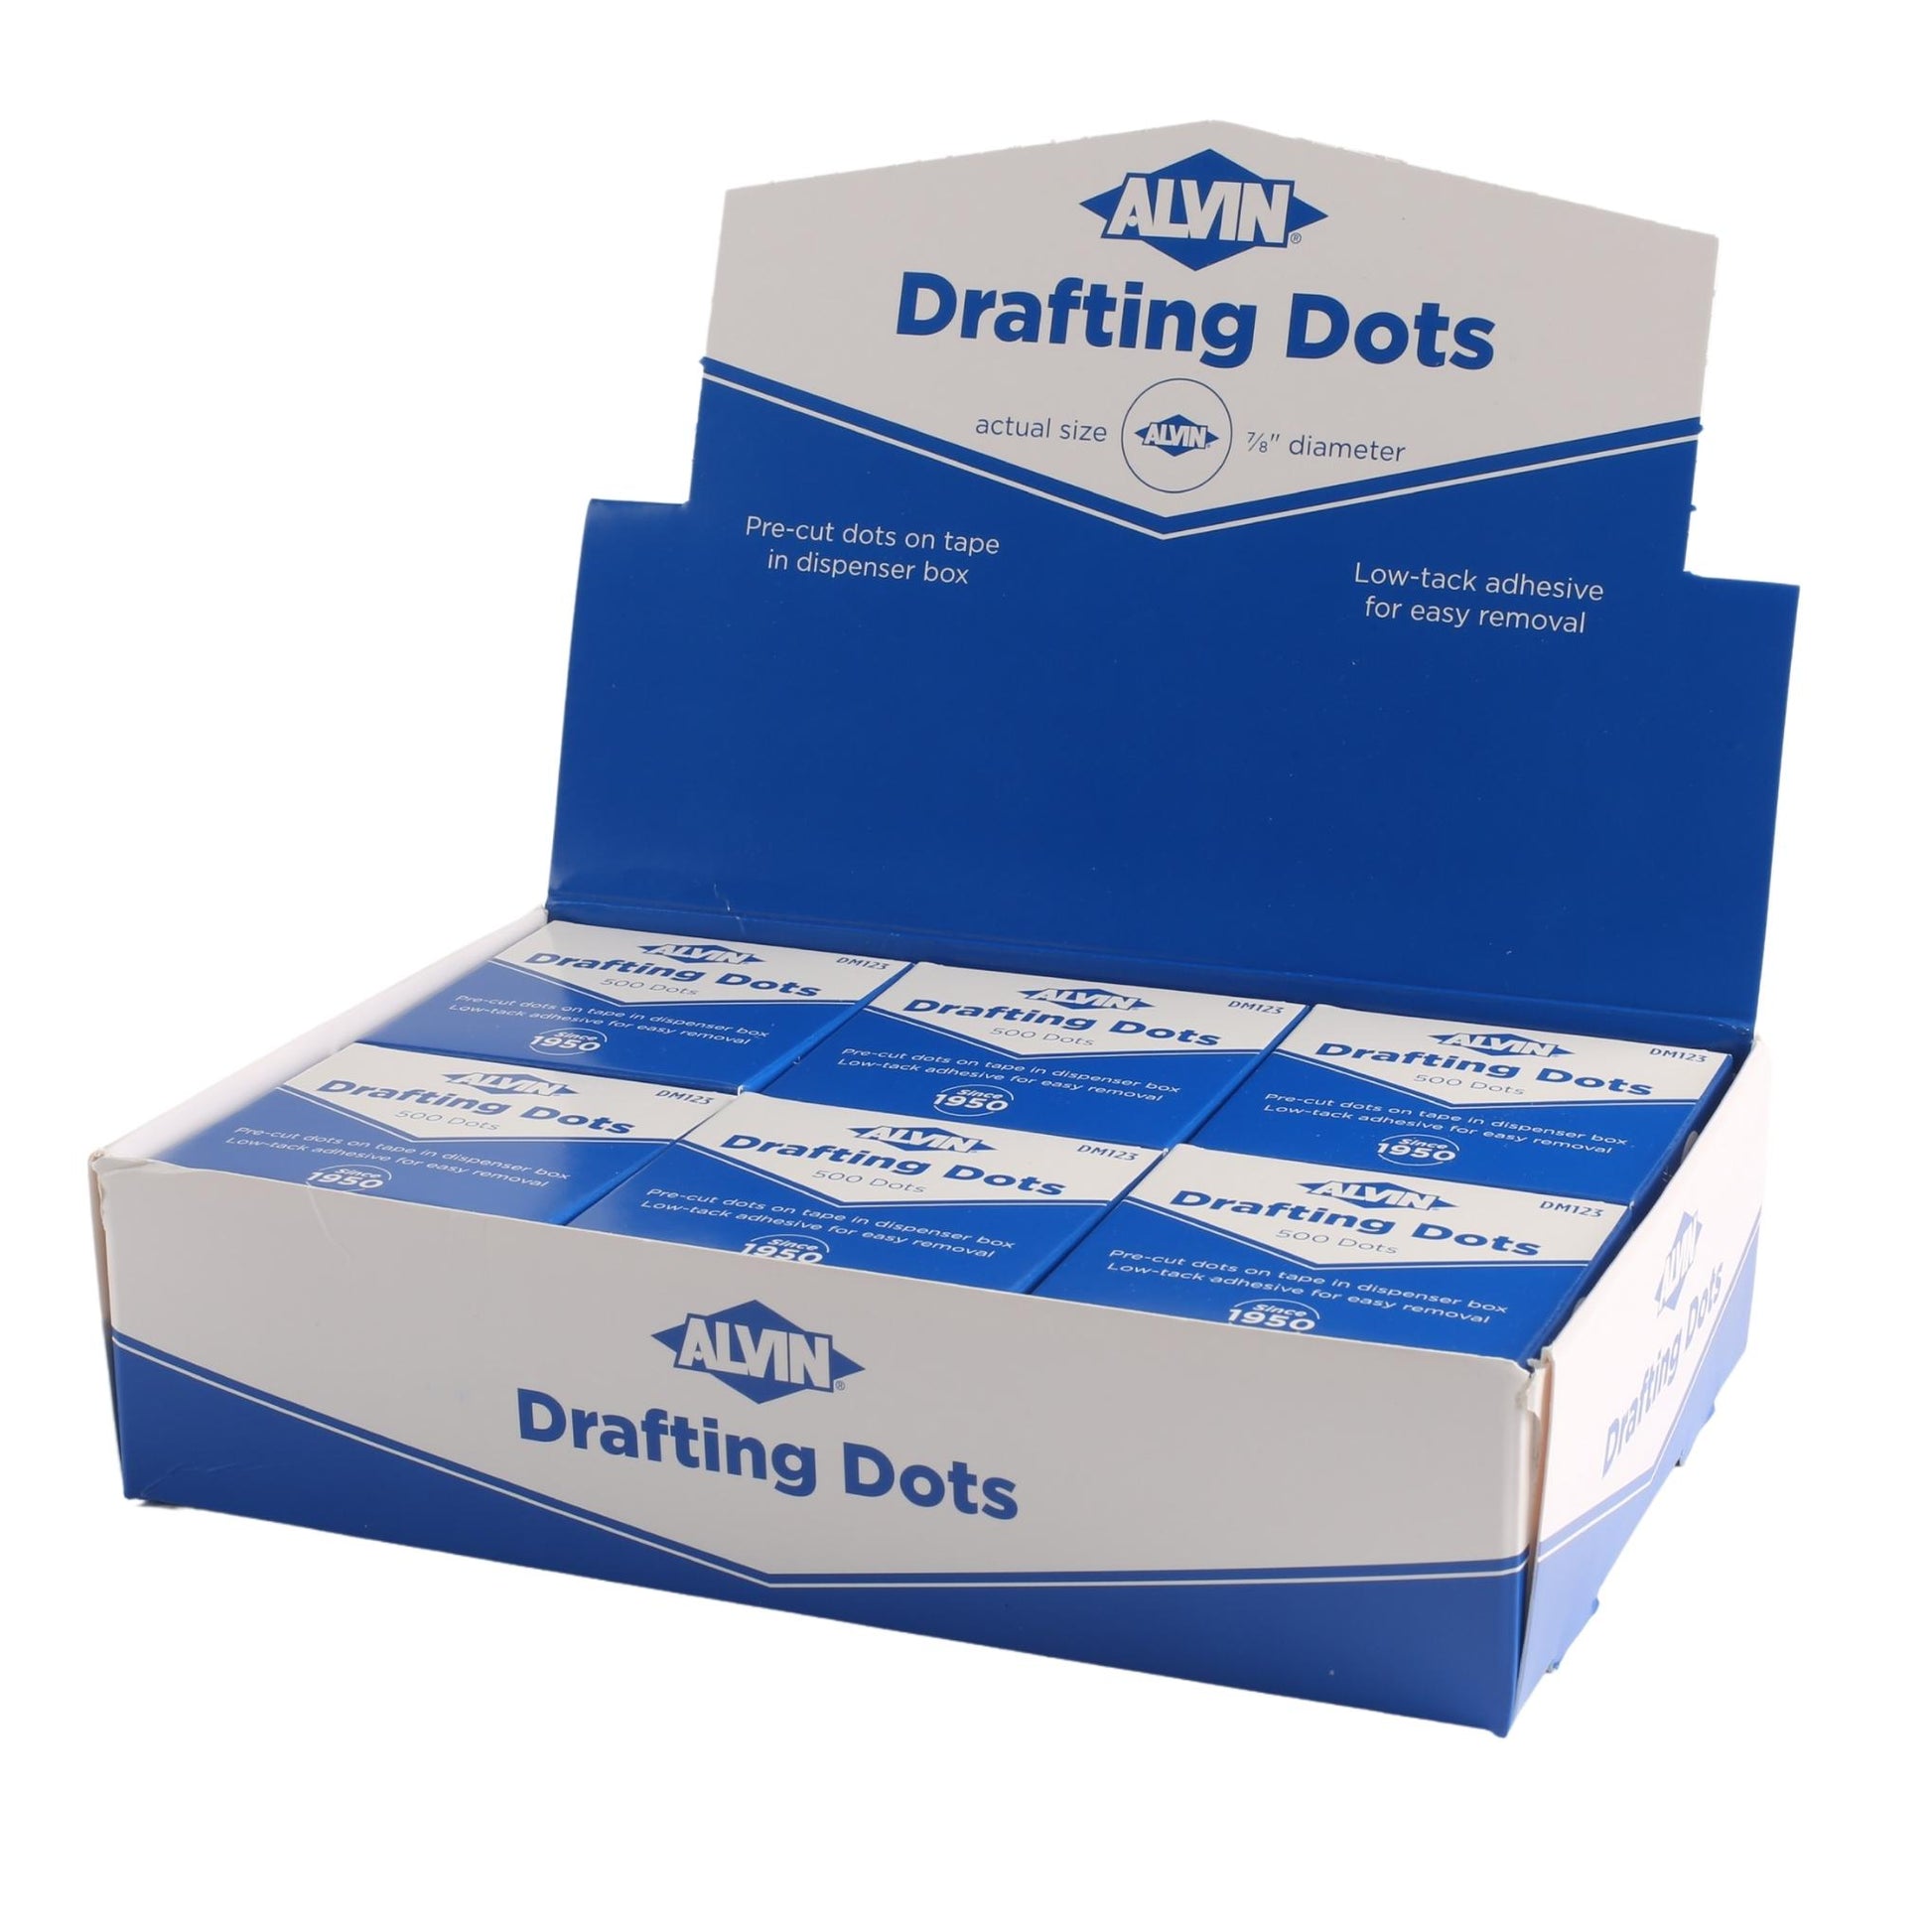 Drafting Dots - GS Direct, Inc.